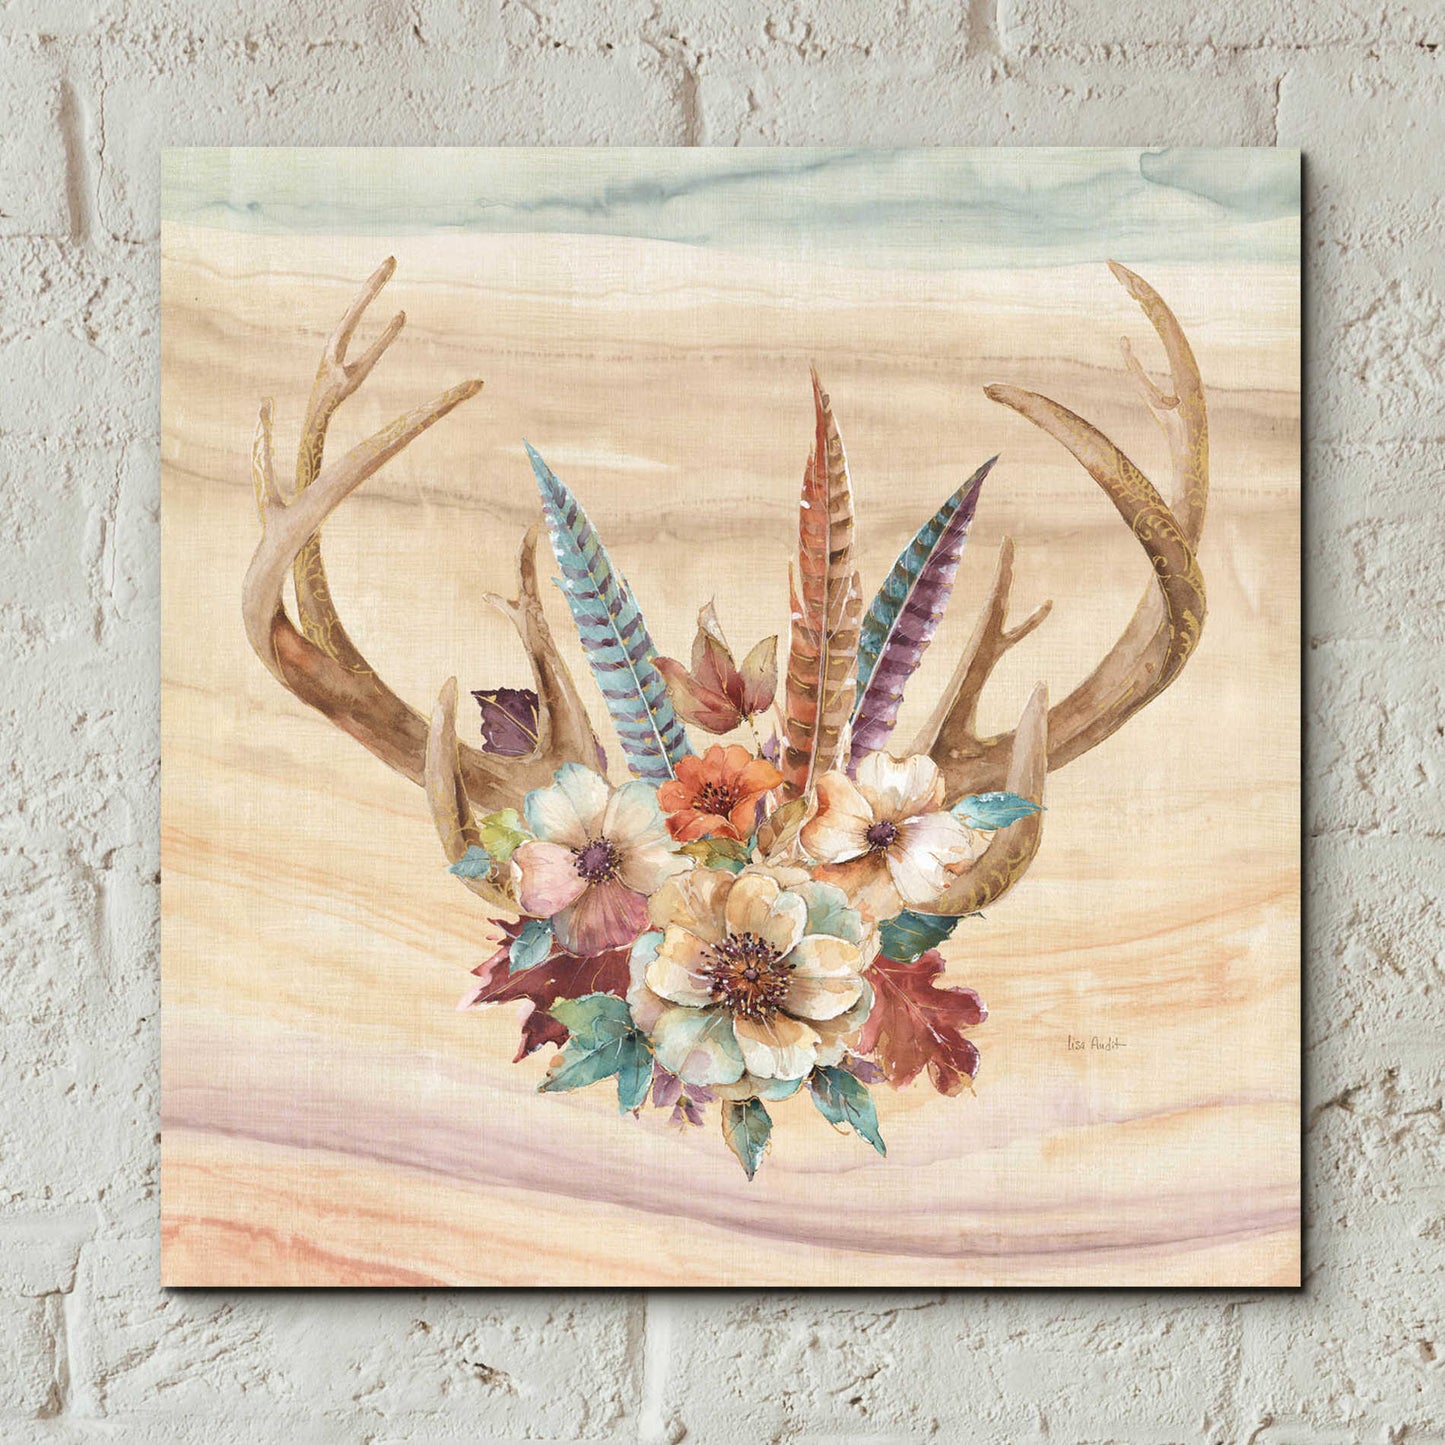 Epic Art 'Spiced Nature VIII' by Lisa Audit, Acrylic Glass Wall Art,12x12